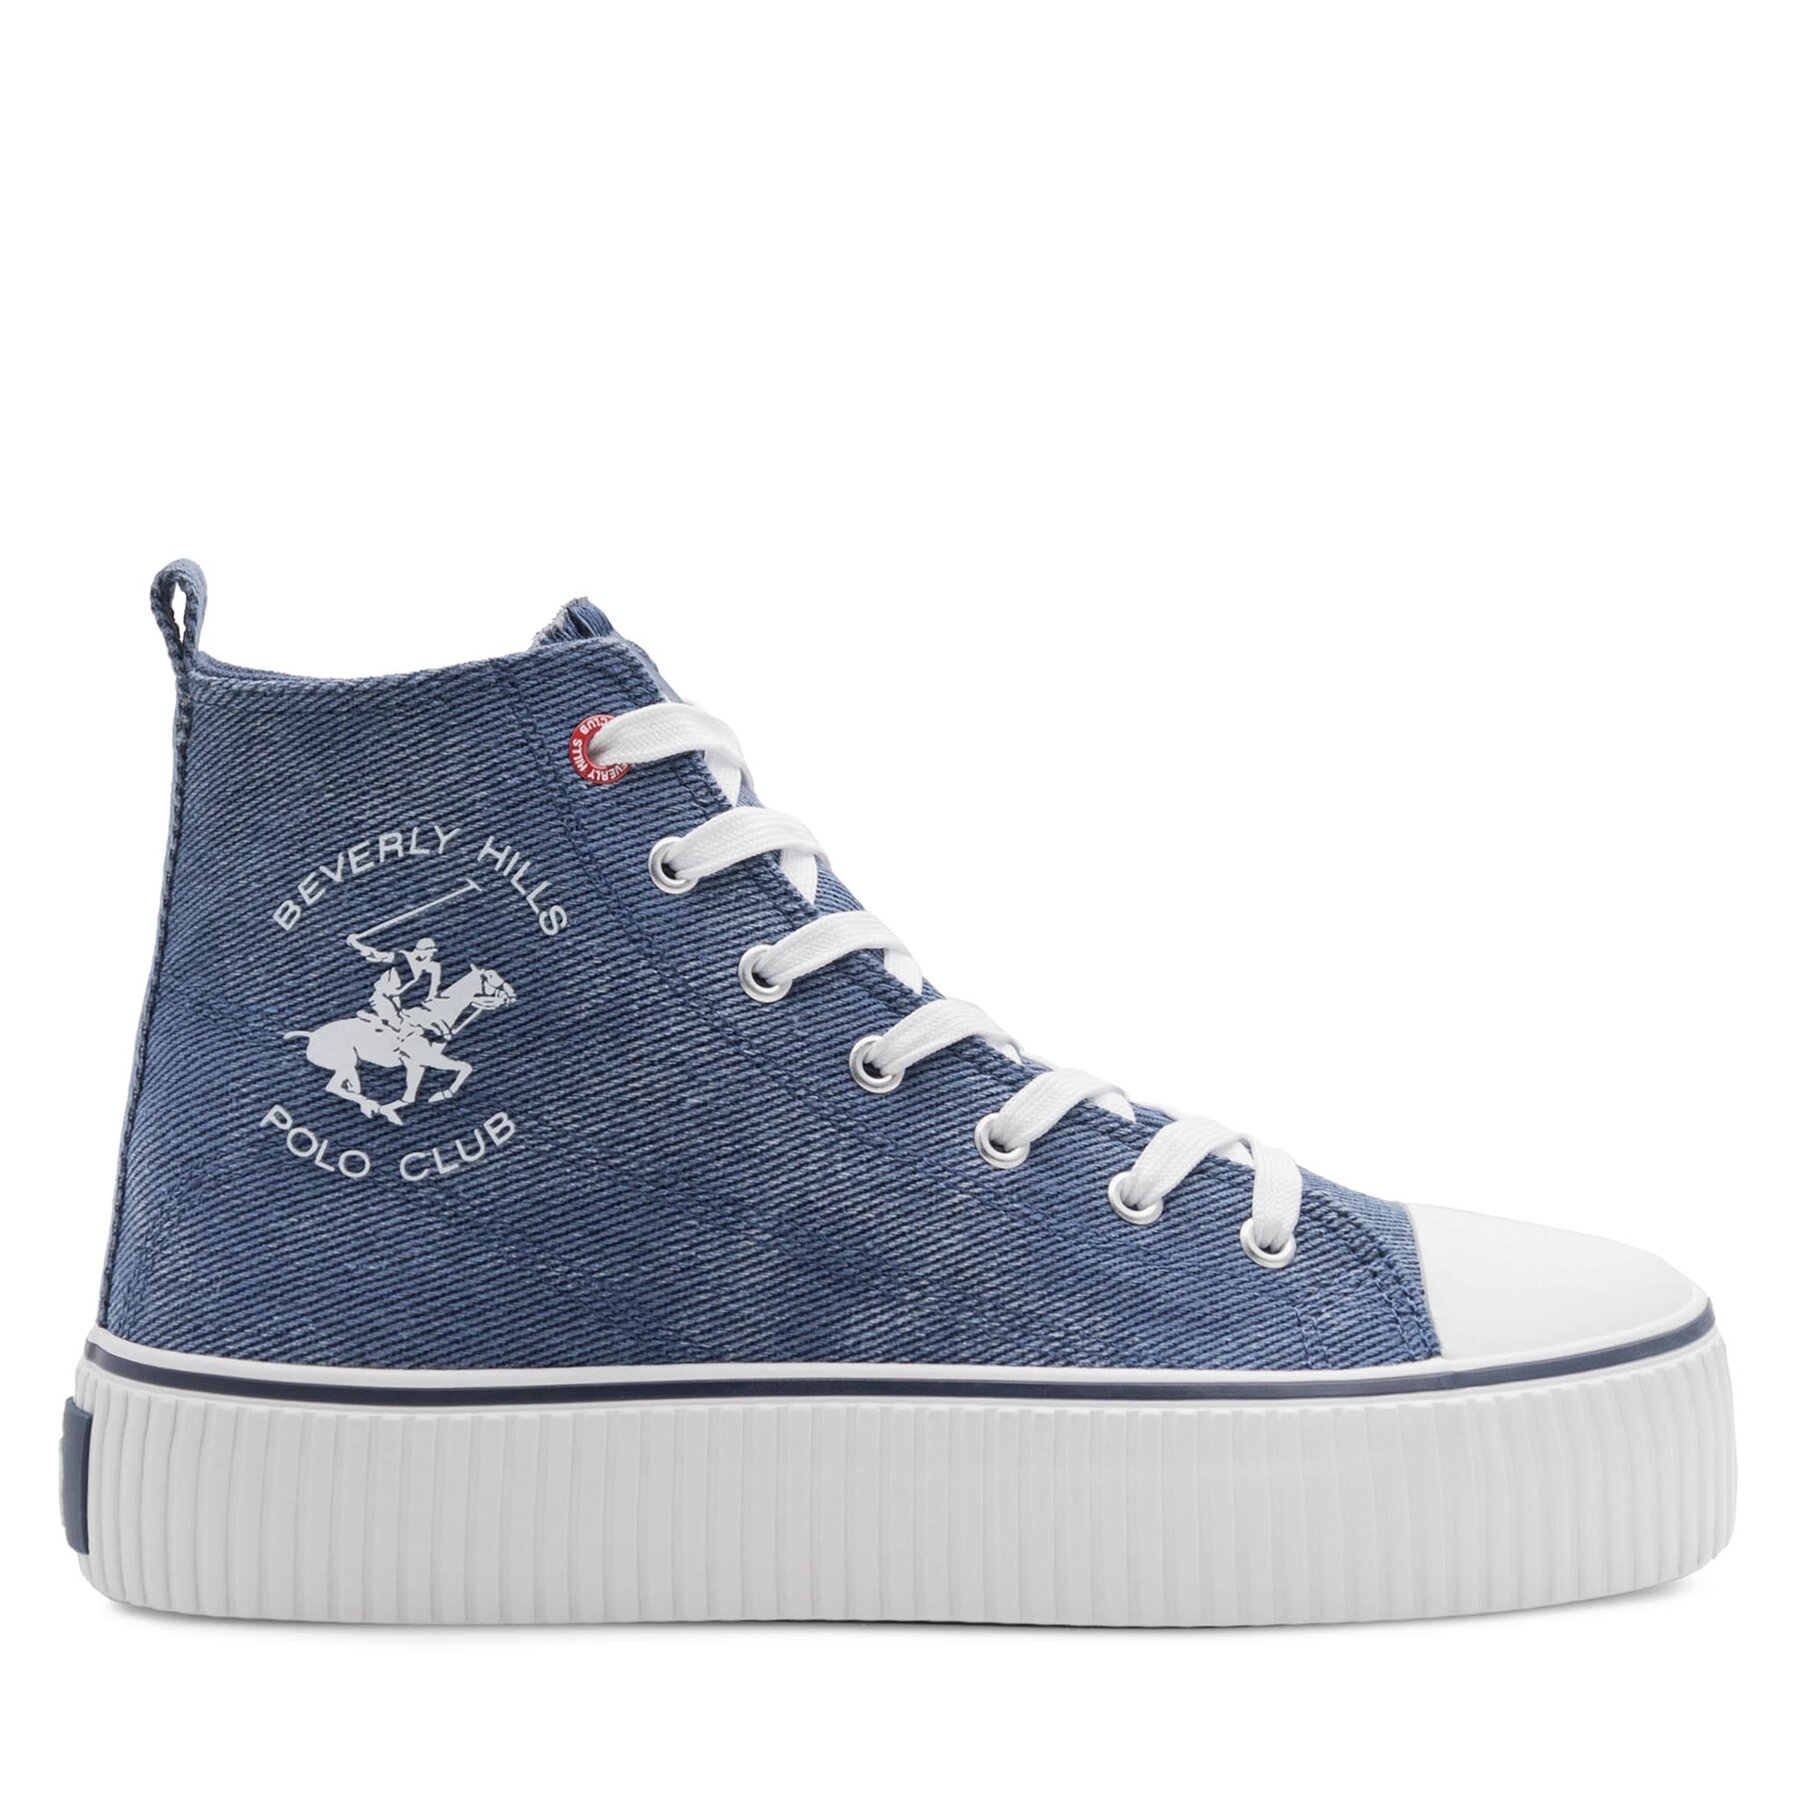 Sneakers aus Stoff Beverly Hills Polo Club BHPC026M Blau von Beverly Hills Polo Club